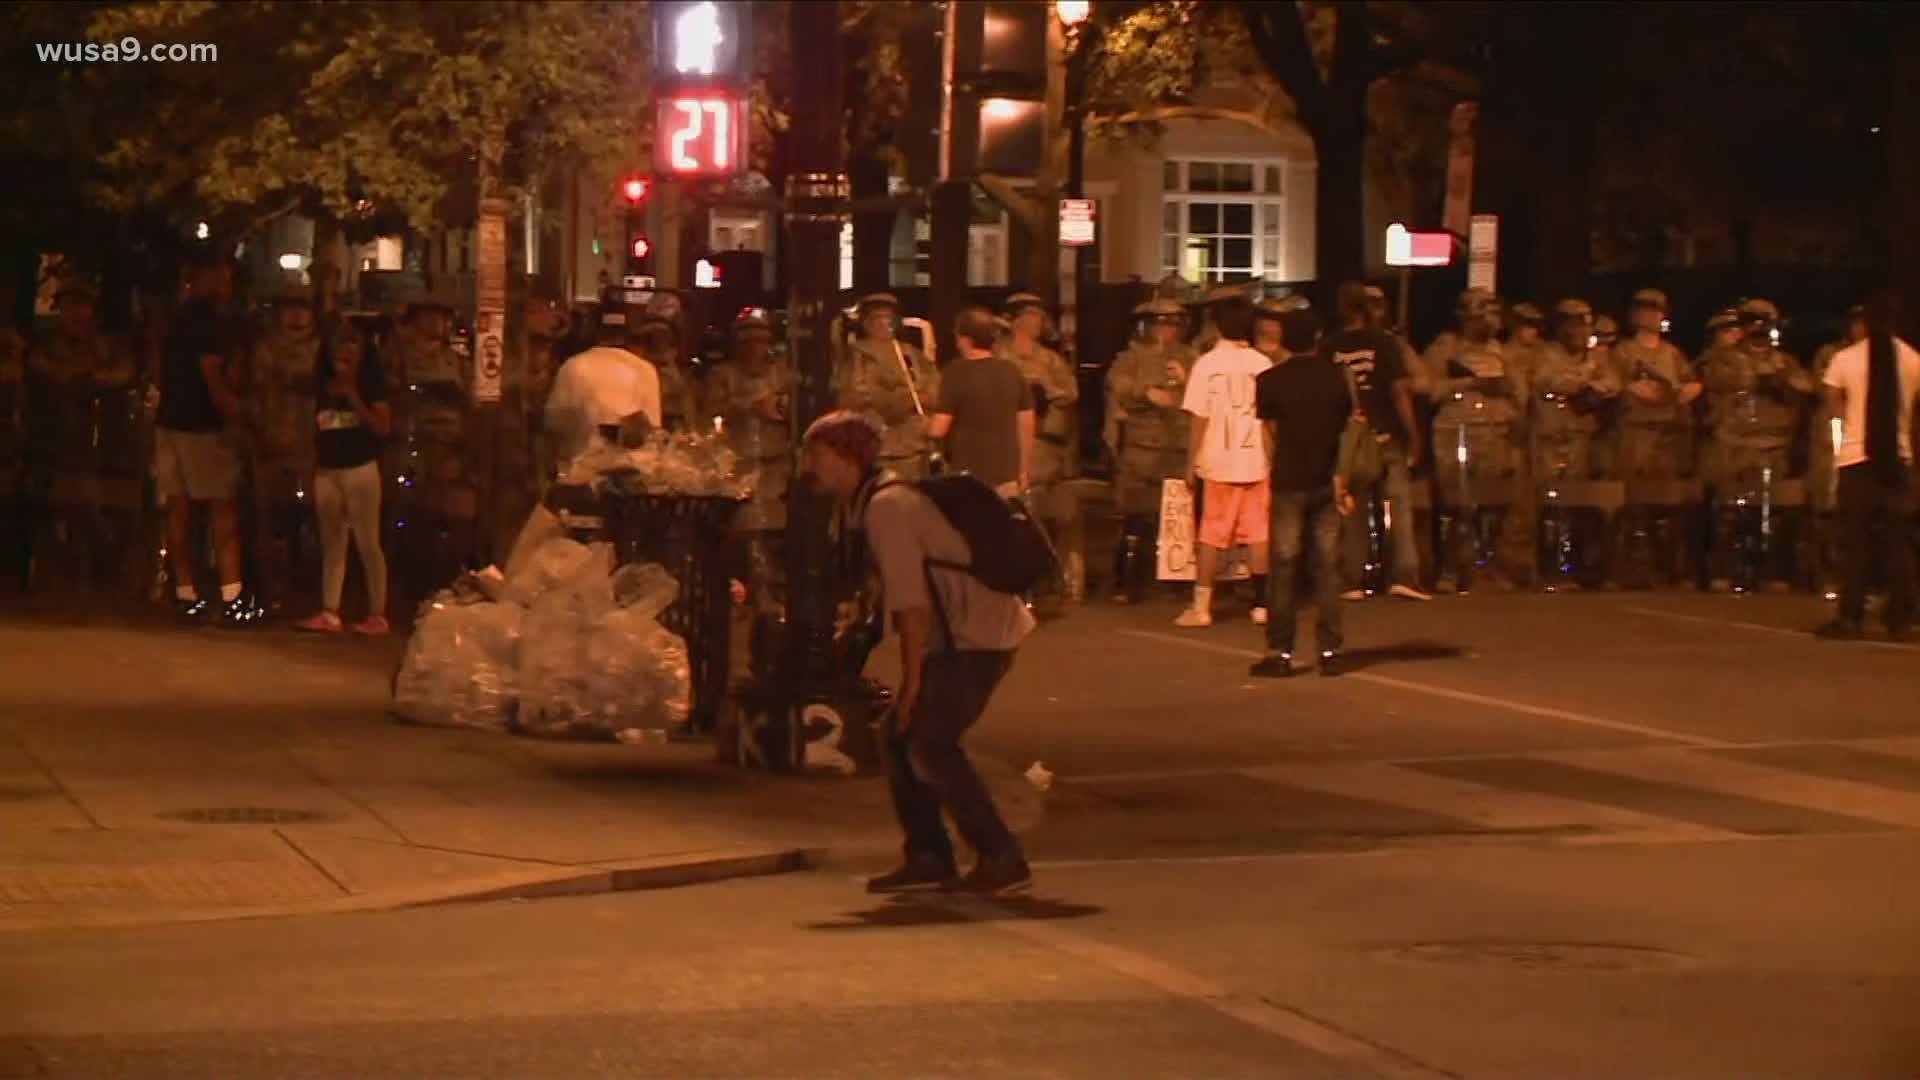 With the District now under a curfew since 11 p.m., protesters are still out in the streets of D.C. The curfew will be in effect until 6 a.m.